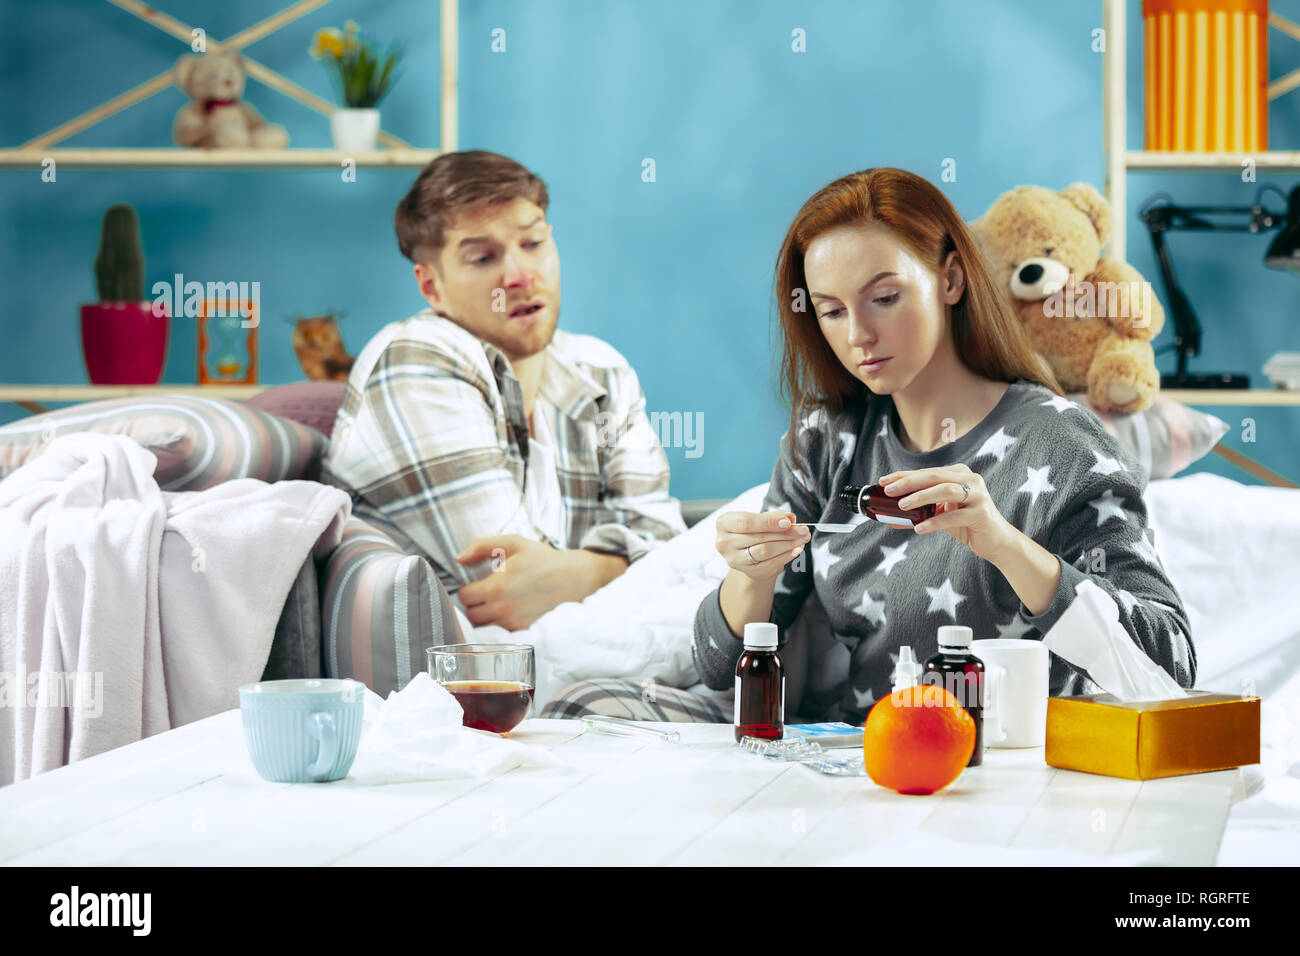 Sick man with fever lying in bed having temperature. The his wife take care for him. The illness, influenza, pain, family concept. Relaxation at Home. Healthcare Concepts. Stock Photo